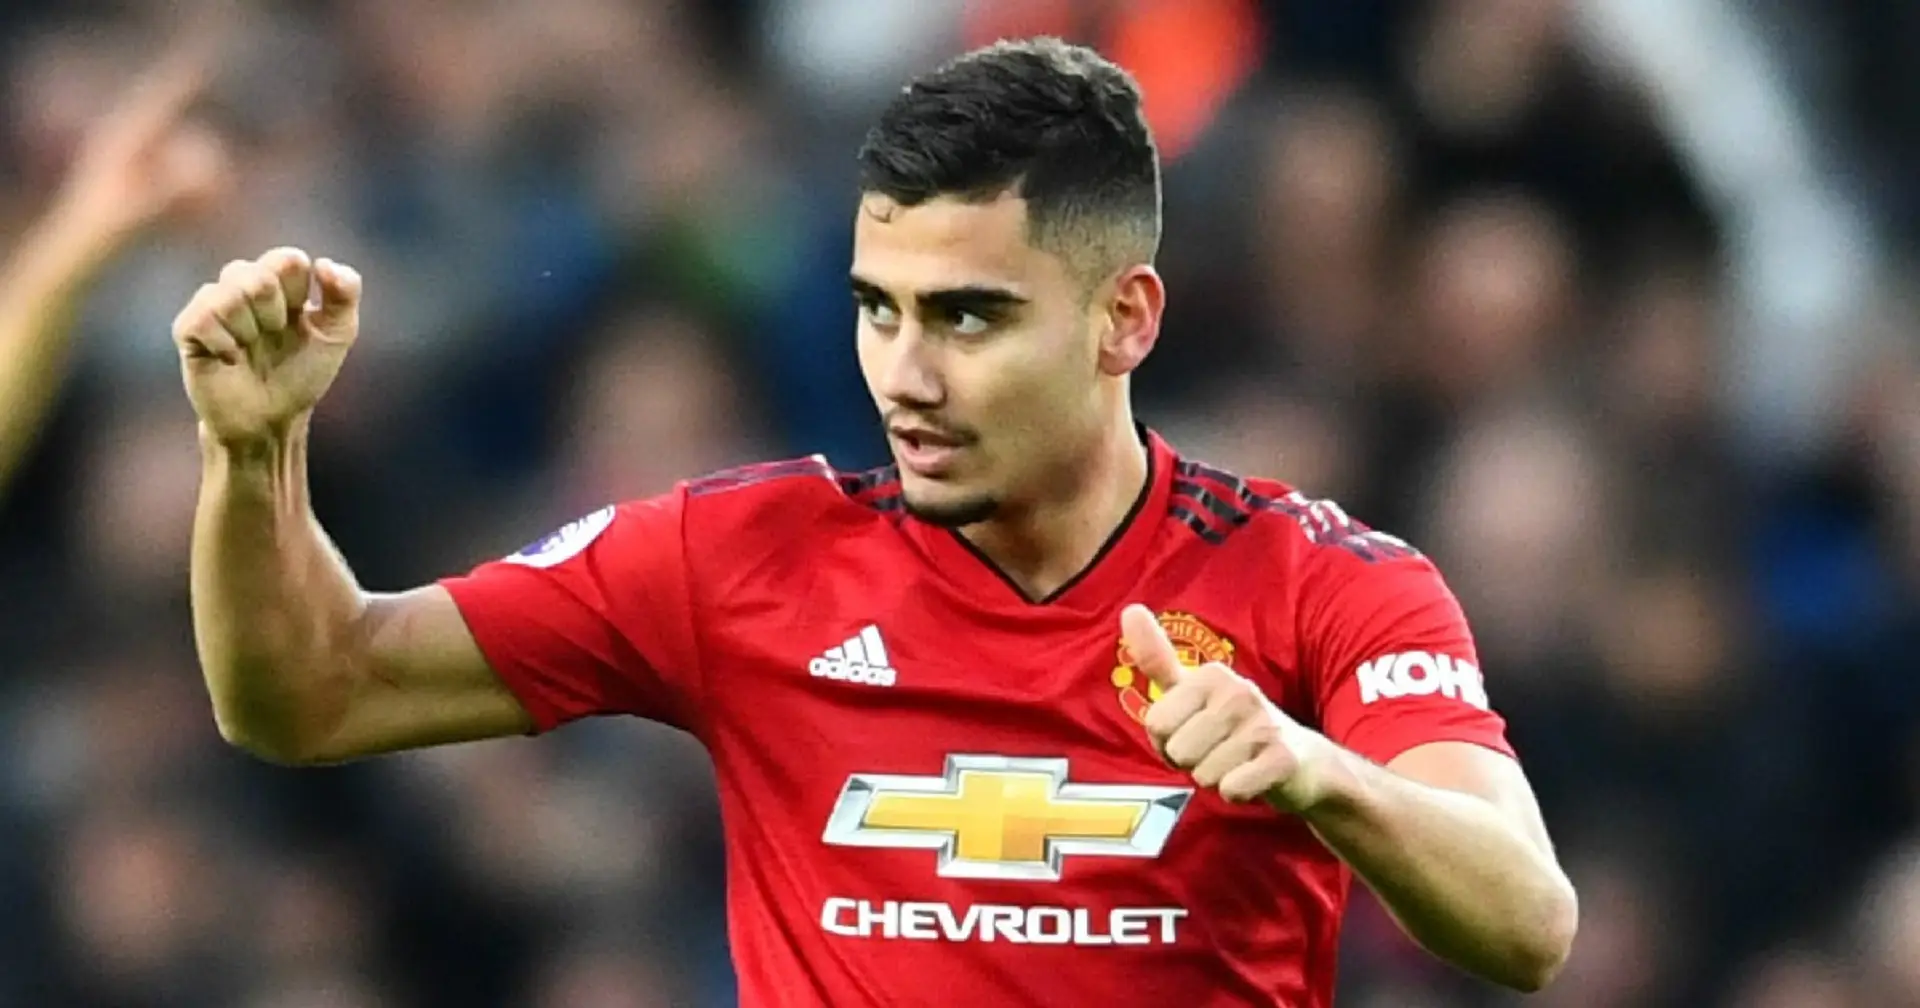 Andreas Pereira medical to take place tomorrow in London: Romano